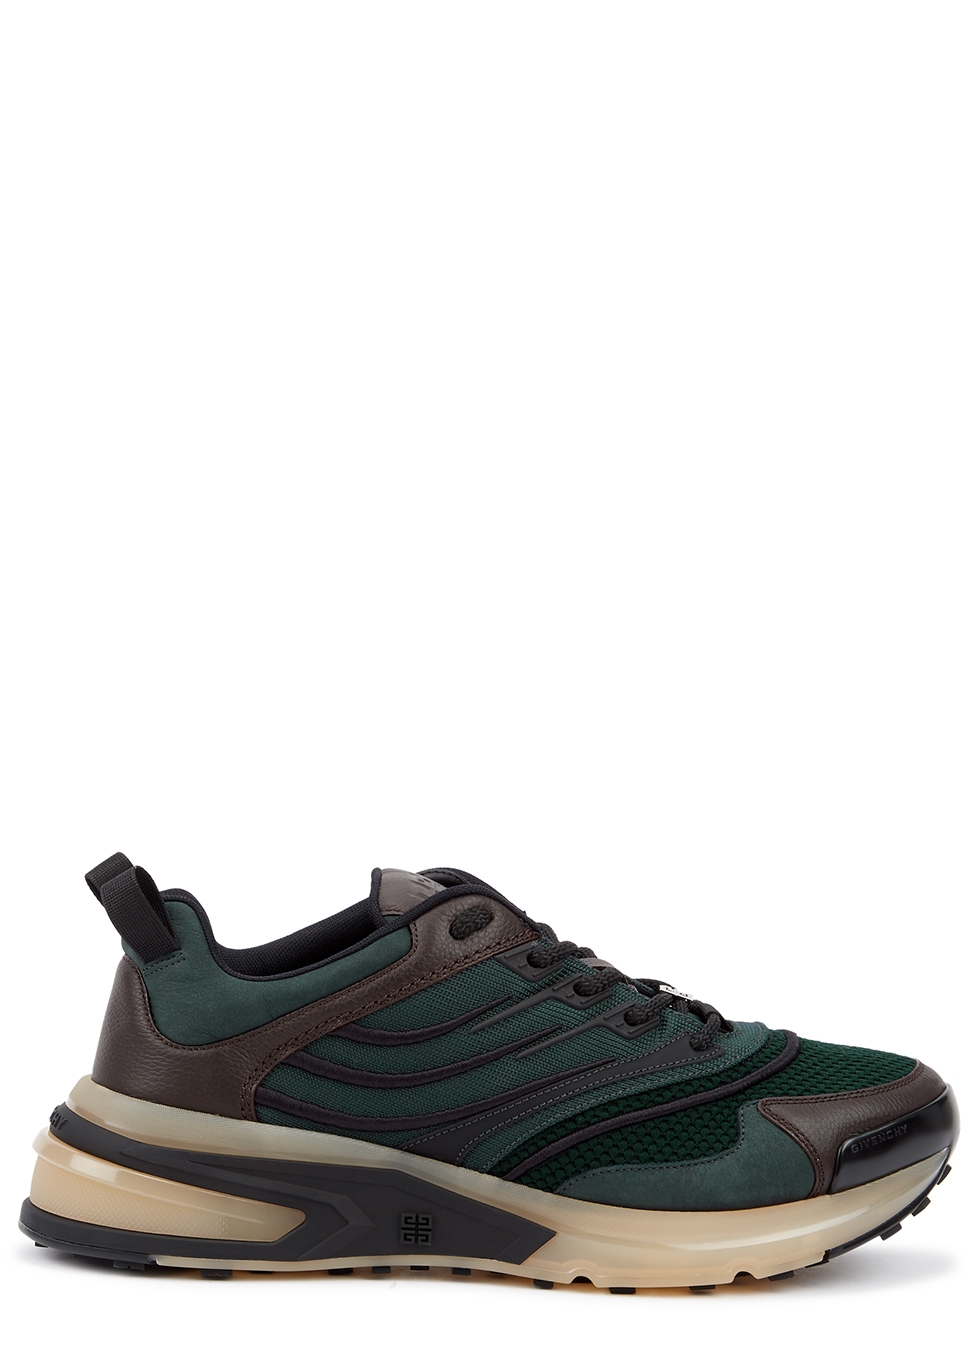 Givenchy Giv 1 green panelled sneakers - Harvey Nichols